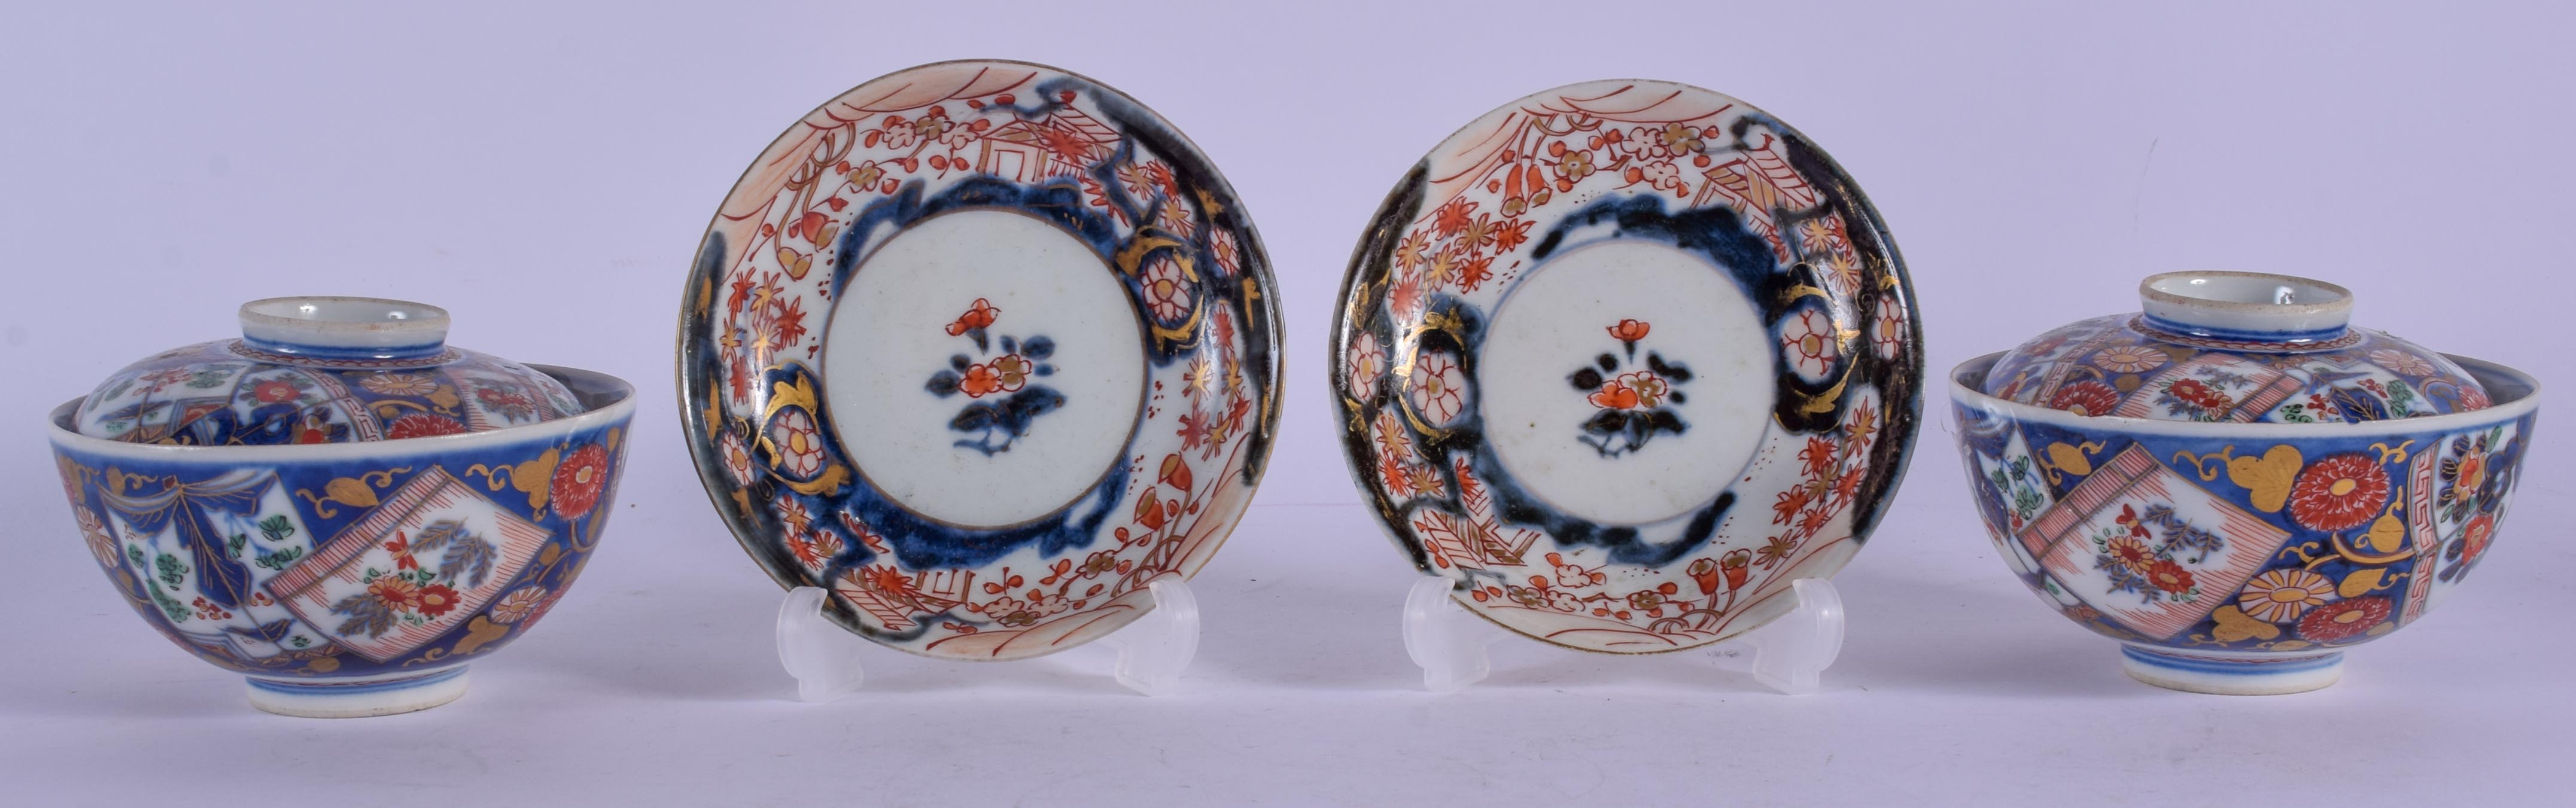 A PAIR OF 19TH CENTURY JAPANESE MEIJI PERIOD IMARI BOWLS AND COVERS painted with floral sprays. 10 c